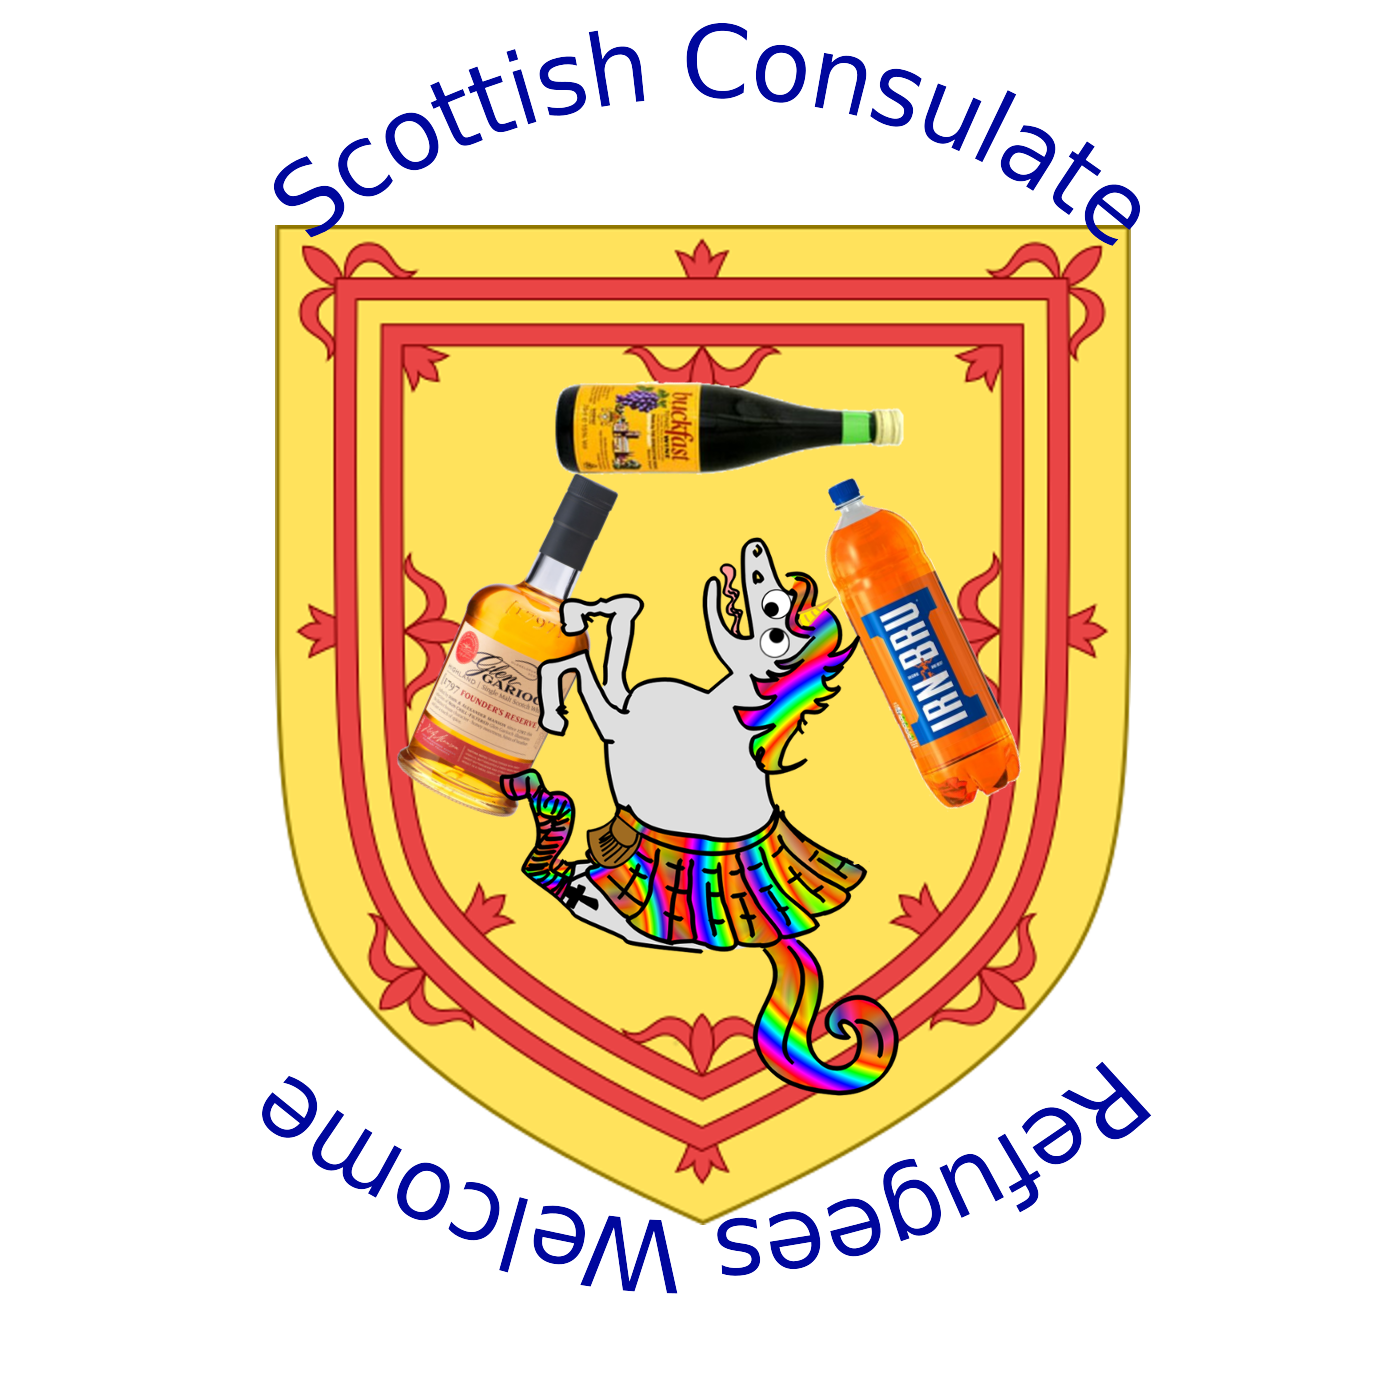 scotcon_coat_of_arms.1530575541.png